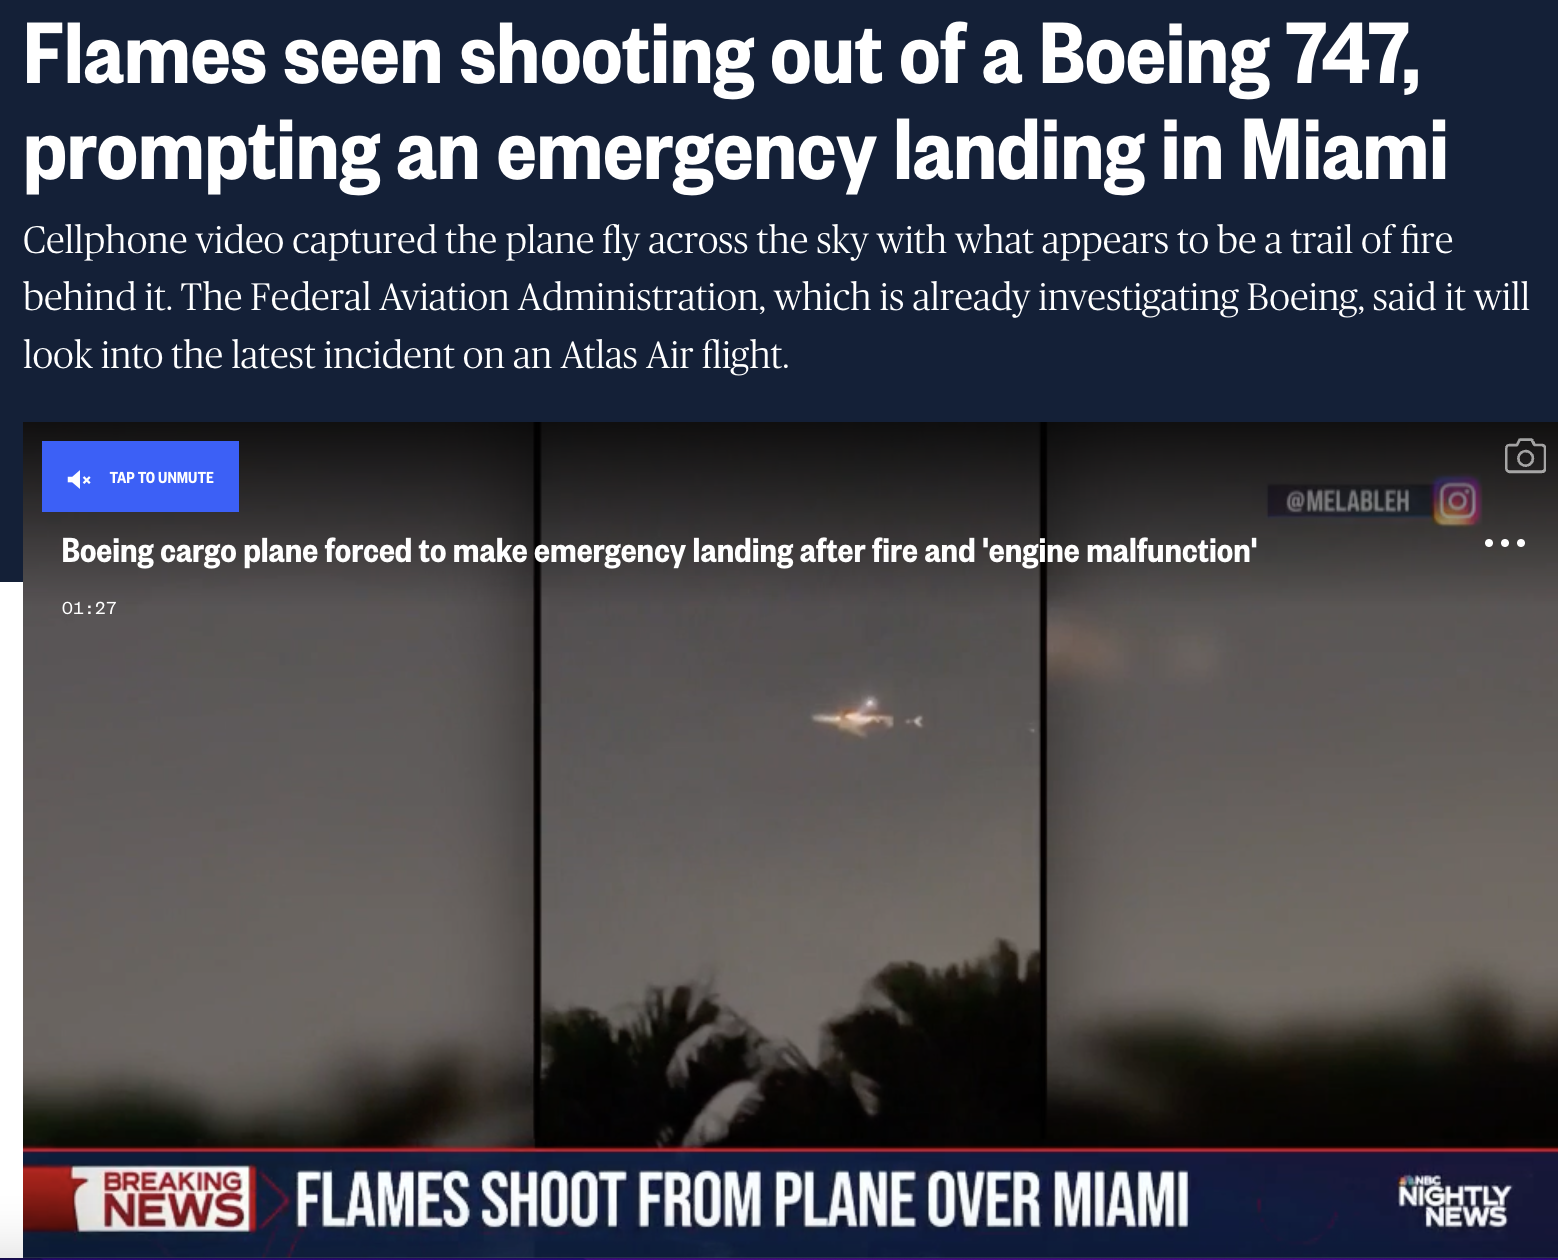 sky - Flames seen shooting out of a Boeing 747, prompting an emergency landing in Miami Cellphone video captured the plane fly across the sky with what appears to be a trail of fire behind it. The Federal Aviation Administration, which is already investig